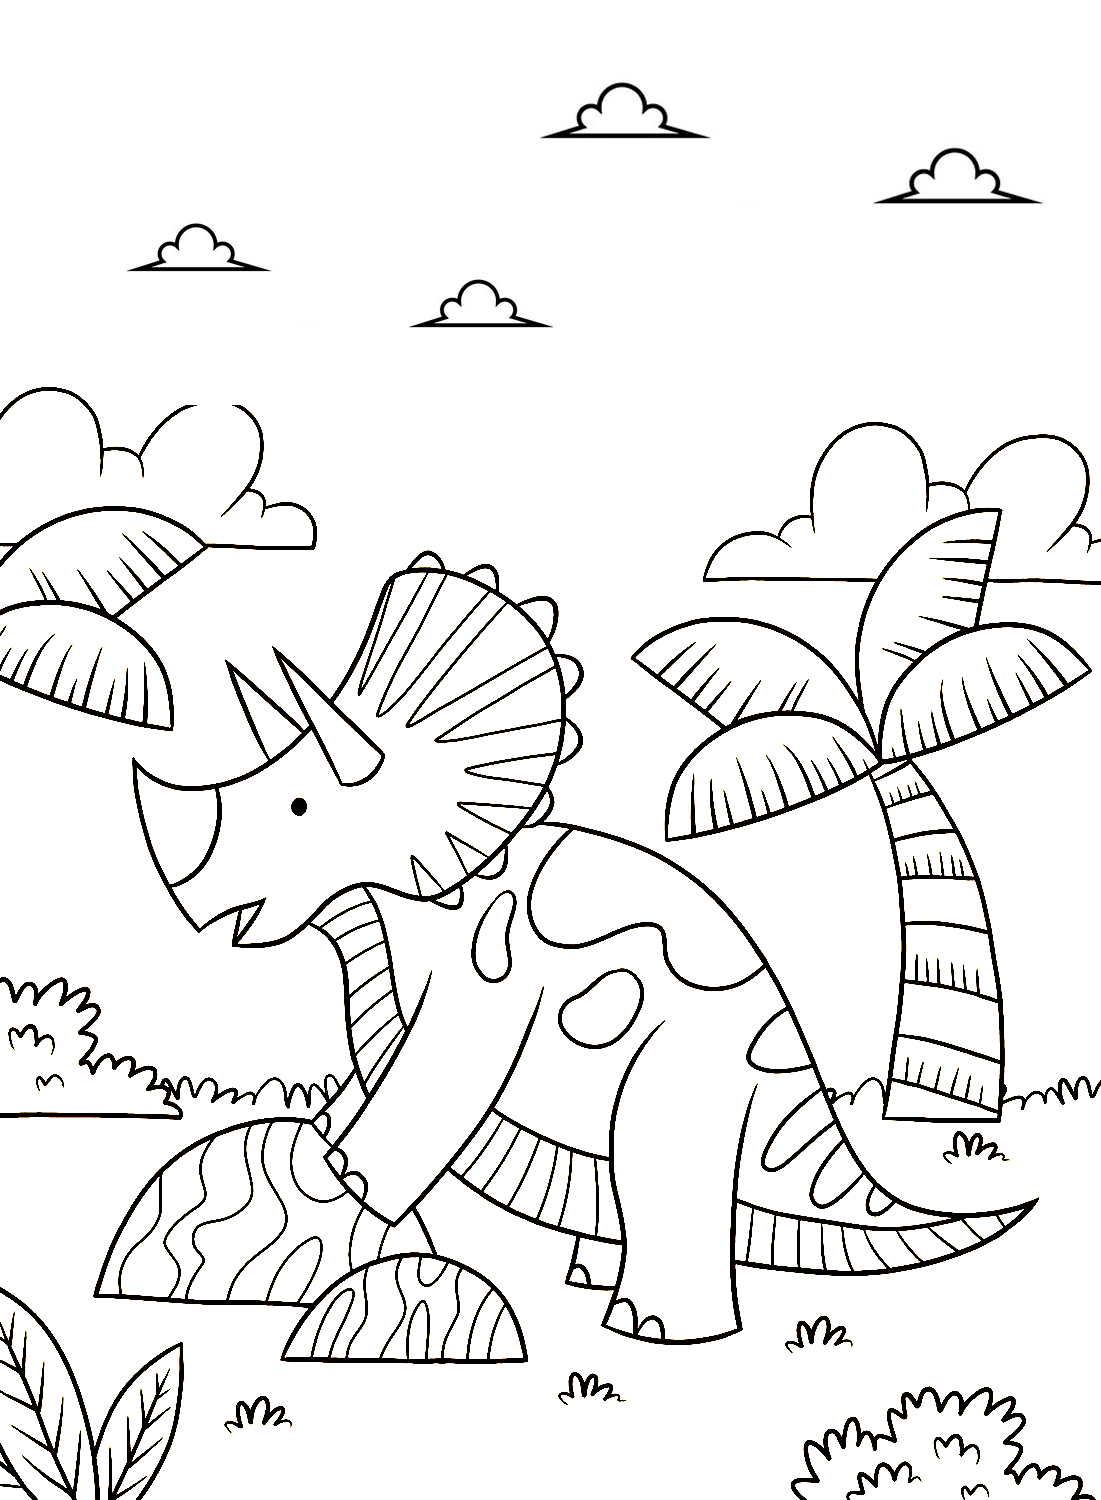 Triceratops printable coloring pages